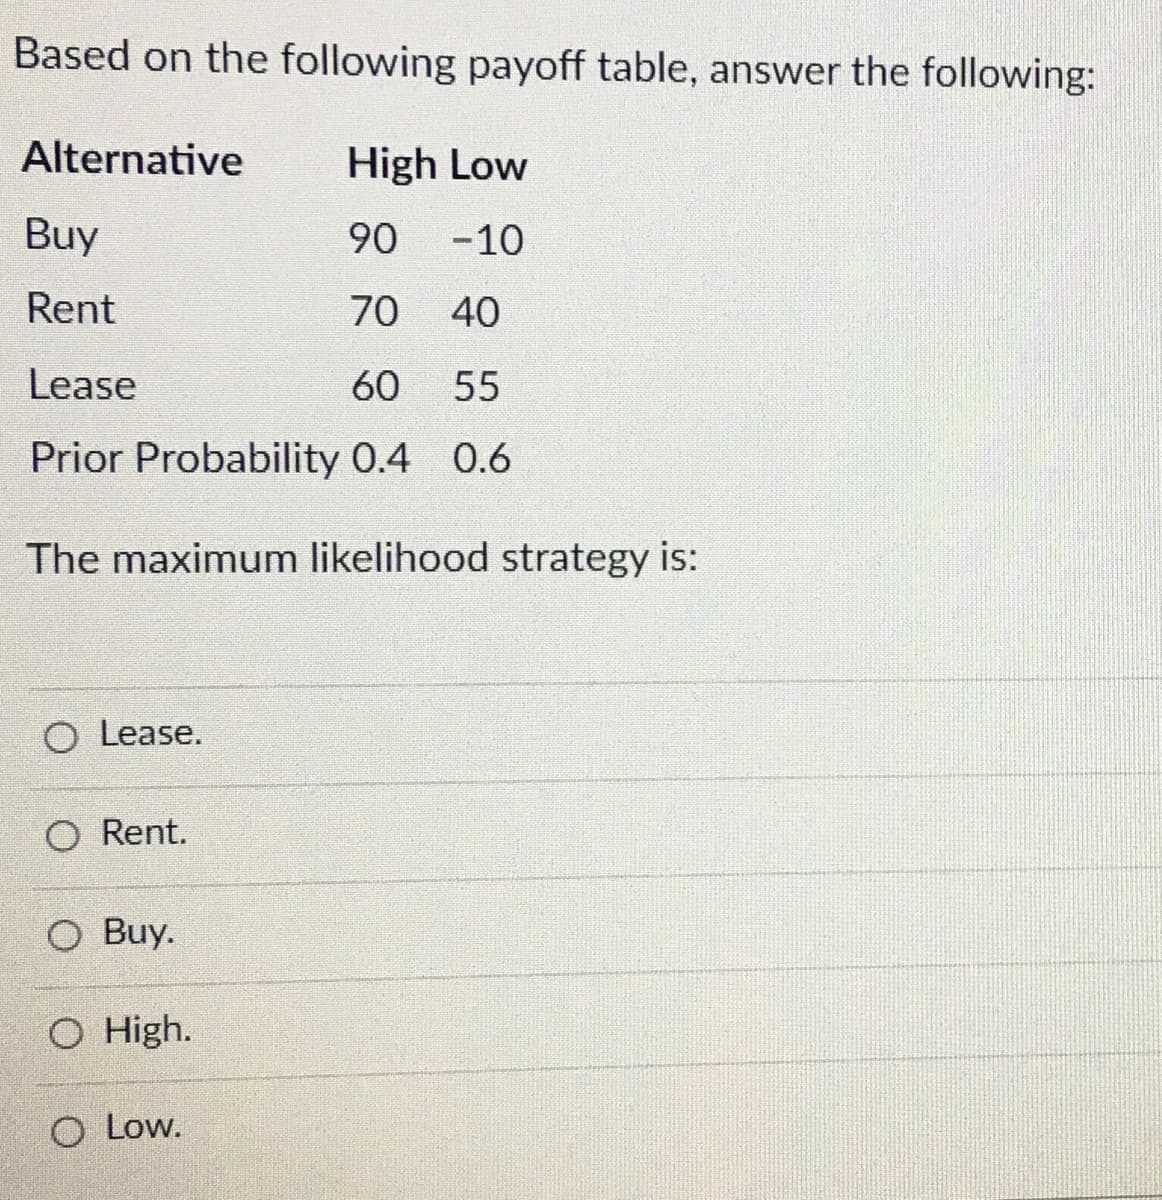 Based on the following payoff table, answer the following:
High Low
90
-10
70 40
Lease
60 55
Prior Probability 0.4 0.6
The maximum likelihood strategy is:
Alternative
Buy
Rent
O Lease.
Rent.
O Buy.
O High.
O Low.